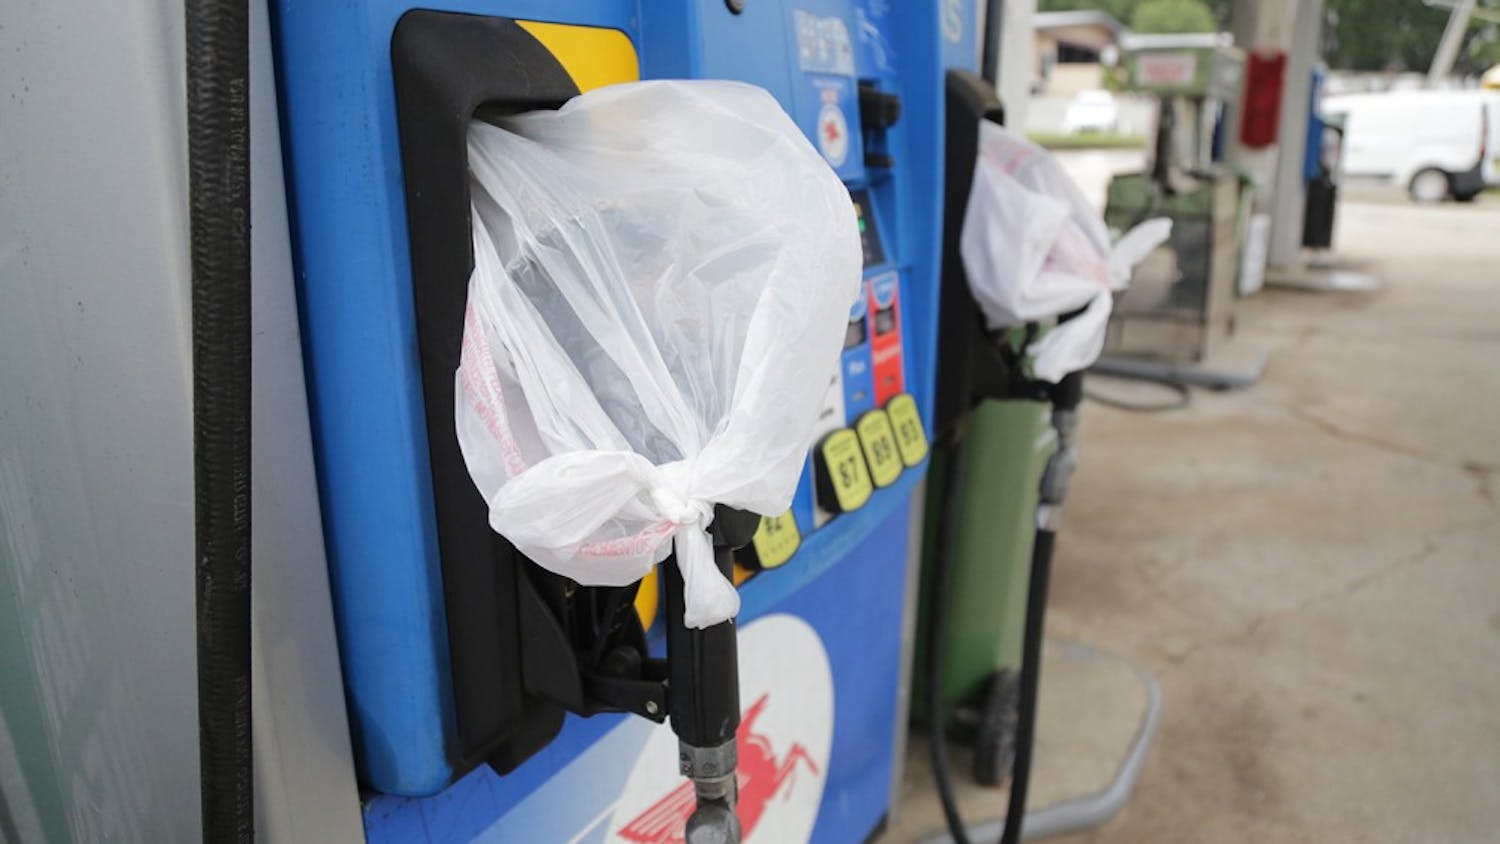 Gas pumps are covered with plastic bags at Run In Jim's gas station on Martin Luther King Jr. Boulevard. This is a common sight at many gas stations in Chapel Hill.  